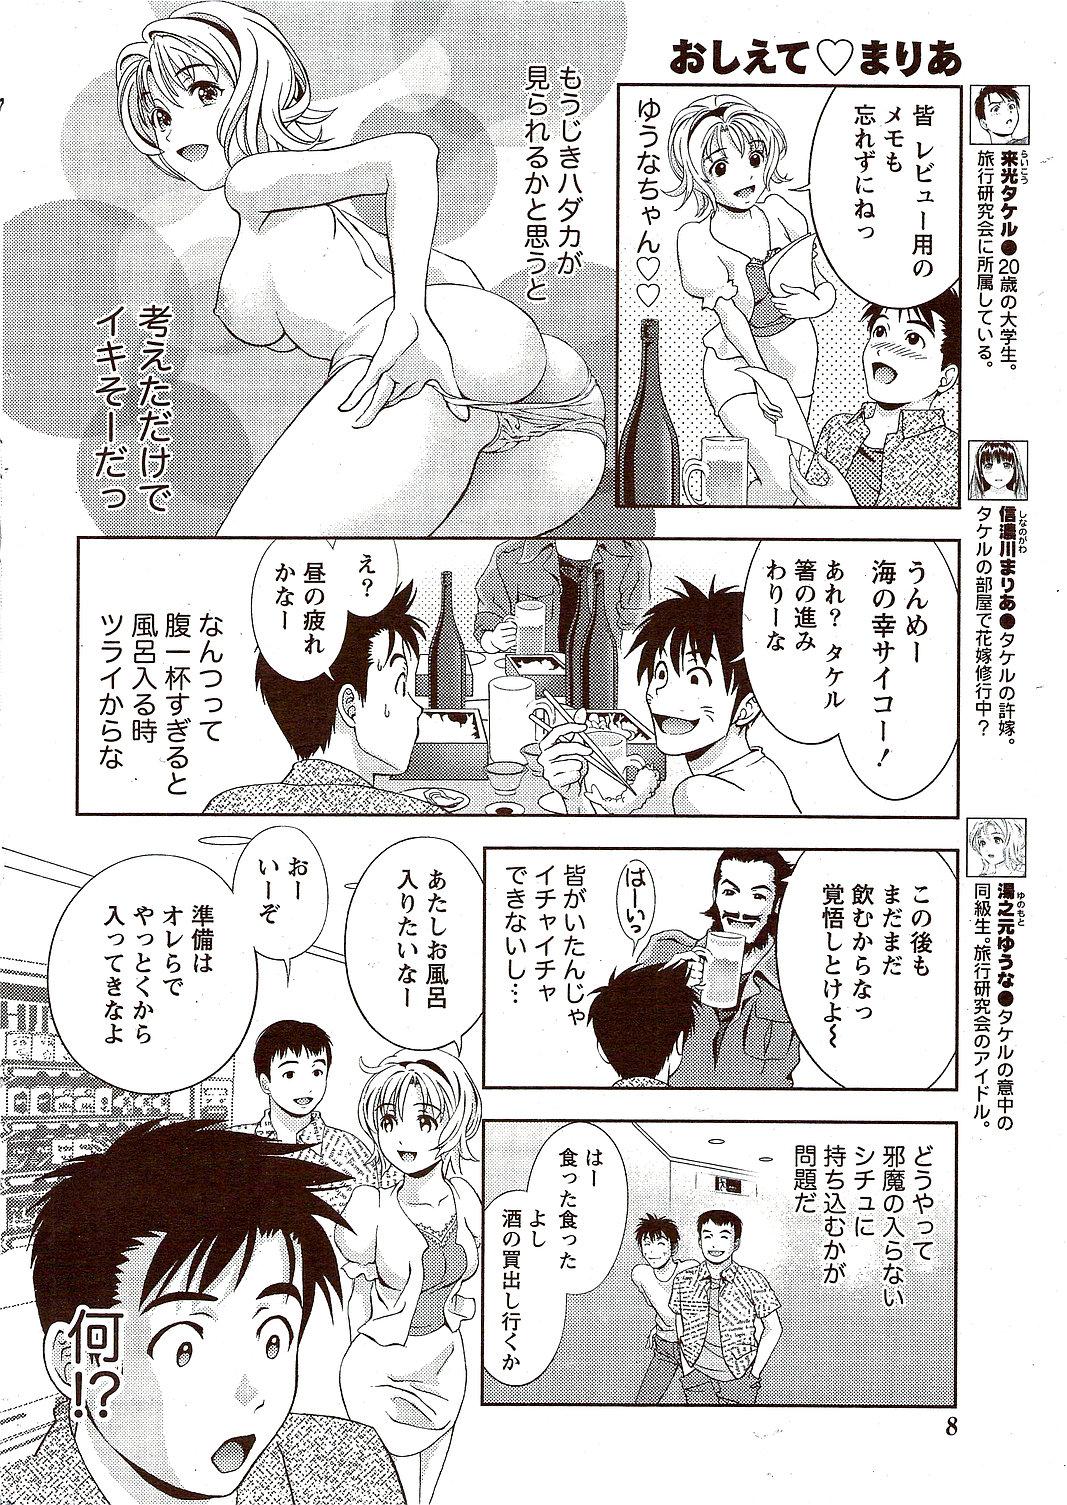 Lady Monthly Vitaman 2009-11 Gay Blowjob - Page 8